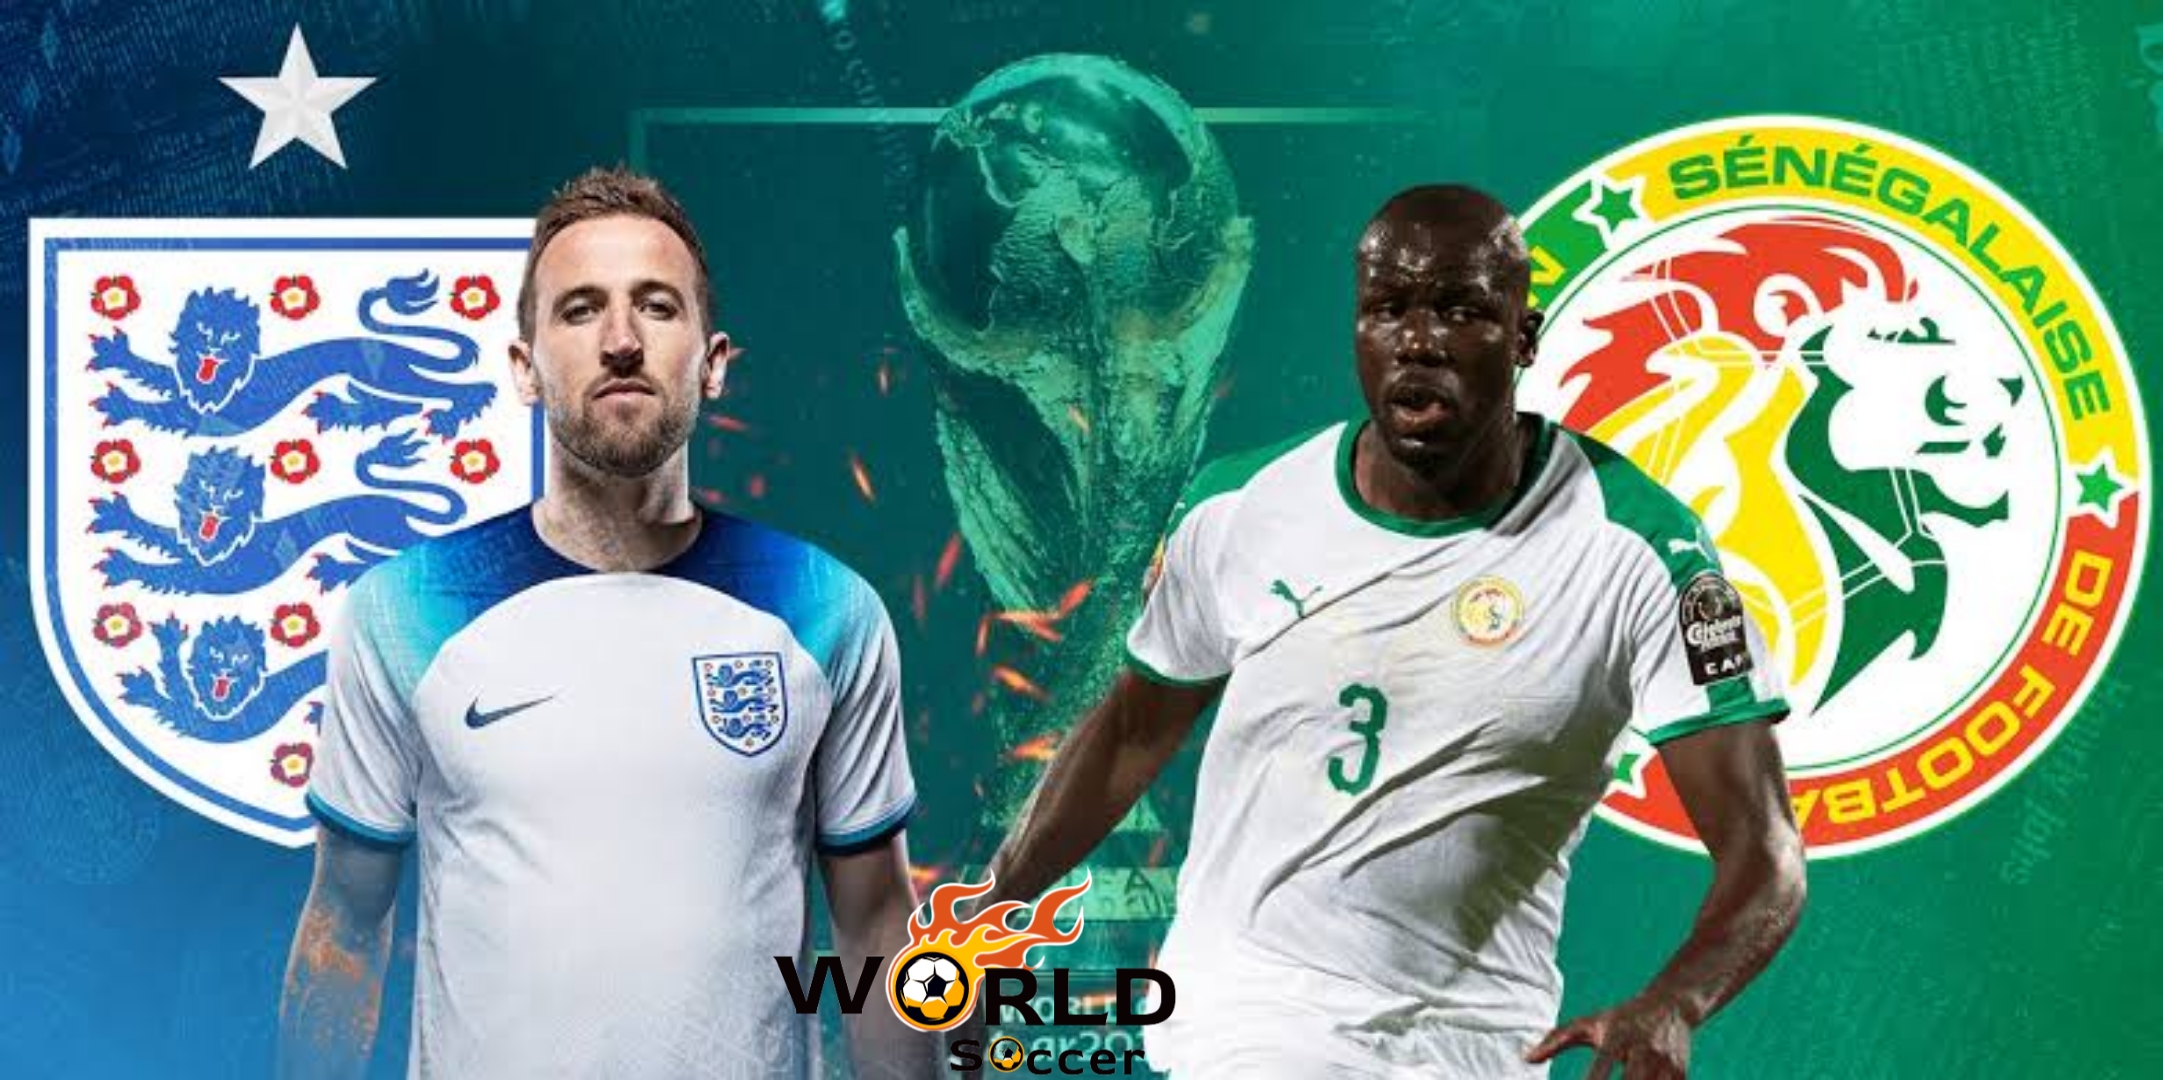 World Cup 2022.. Senegal challenges England at the “Lions” summit, at the price of the final Today, Sunday, at nine o'clock in the evening, a fiery summit will be held between Senegal and England at Al-Bayt Stadium, as part of the 2022 World Cup round of 16 competitions that are currently being held in Qatar and will continue until December 18. Qatar World Cup 2022 Senegal advanced to the round of 16 of the 2022 World Cup in Qatar after finishing second in Group A with 6 points, while England qualified after finishing first in Group Two with 7 points. Senegal began its career in the group stage by defeating the Netherlands with two clean goals, then beat Qatar with three goals to one, before defeating Ecuador with two goals to one to settle the qualification visa in second place behind the Netherlands, and knock Ecuador out of the tournament. England against Senegal, while the England national team started its campaign in the World Cup with a huge victory over Iran, 6 goals to 2, then tied with America with a goal for each, before defeating Wales with 3 clean goals, to lead Group Two with 7 points. The England national team is looking for its second title from the World Cup in the 2022 World Cup, after winning the championship in 1966. World Cup 2022 While the Senegalese national team is looking forward to repeating the achievement of the 2002 World Cup, after qualifying for the quarter-finals of the World Cup, after they overcame Sweden 2-0 in the round of 16. The colors of the England national team, led by its coach Gareth Southgate, are defended by a large number of prominent players in Europe, led by Harry Kane, Jody Bellingham, Marcus Rashford, Raheem Sterling, Phil Foden and Jack Grealish. While Aliou Cisse, coach of Senegal, relies on each of the players, most notably Kalidou Coulibaly, Ismaila Sarr, Cheikhou Kouyaté, Bamba Diang, Nambles Mendy and Edouard Mendy.